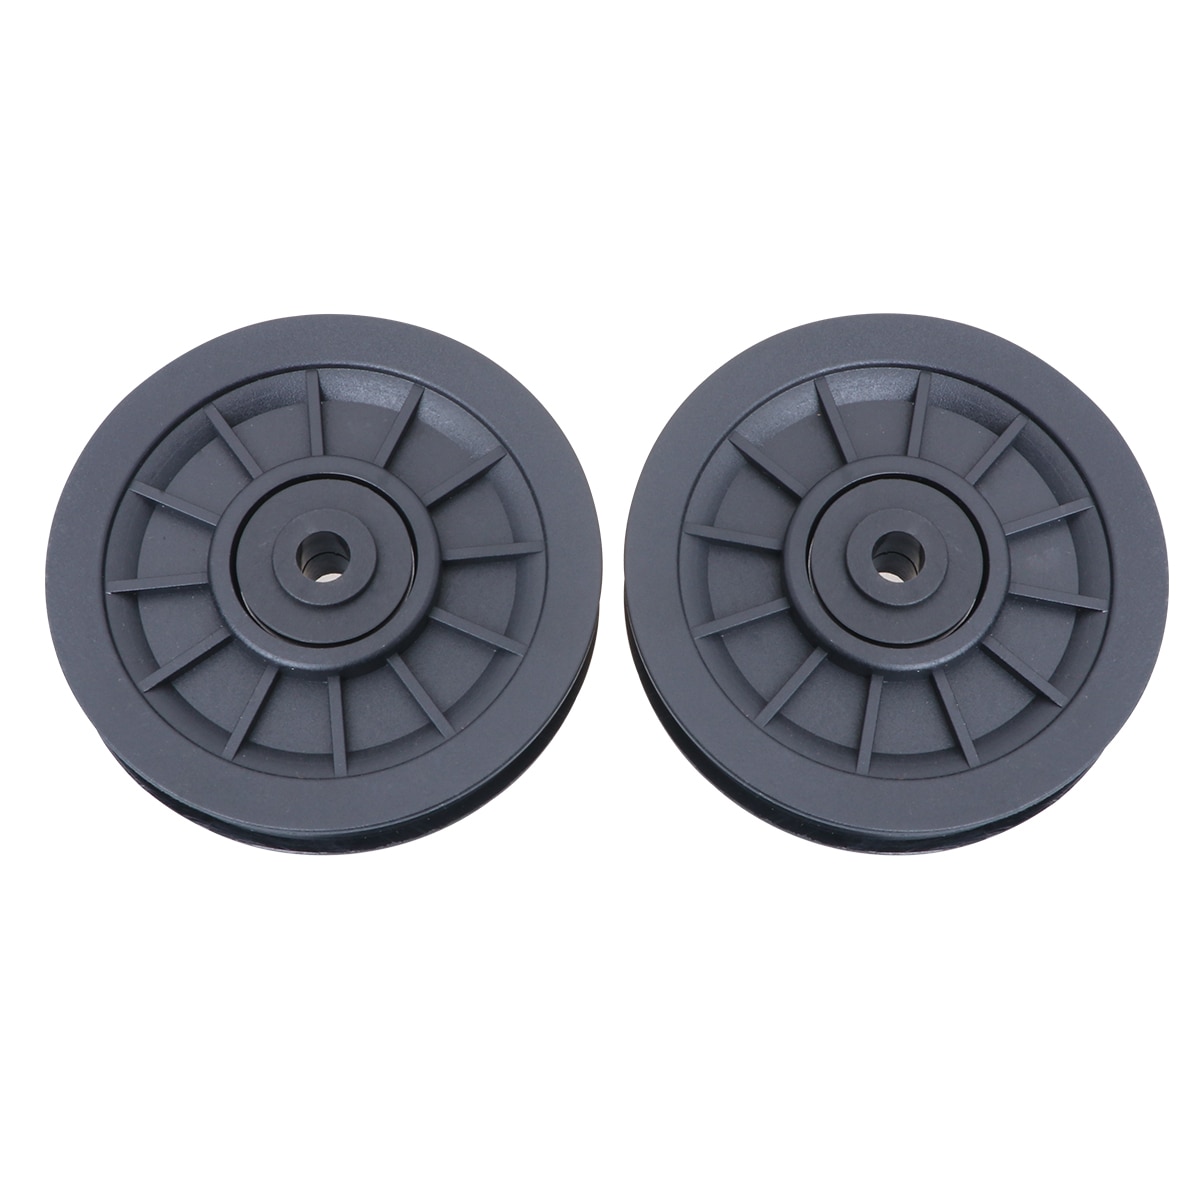 2Pcs Universal Bearing Pulley Wheel Fitness Equipment Part Wearproof Pulley Replacement Parts For Gym Fitness Black